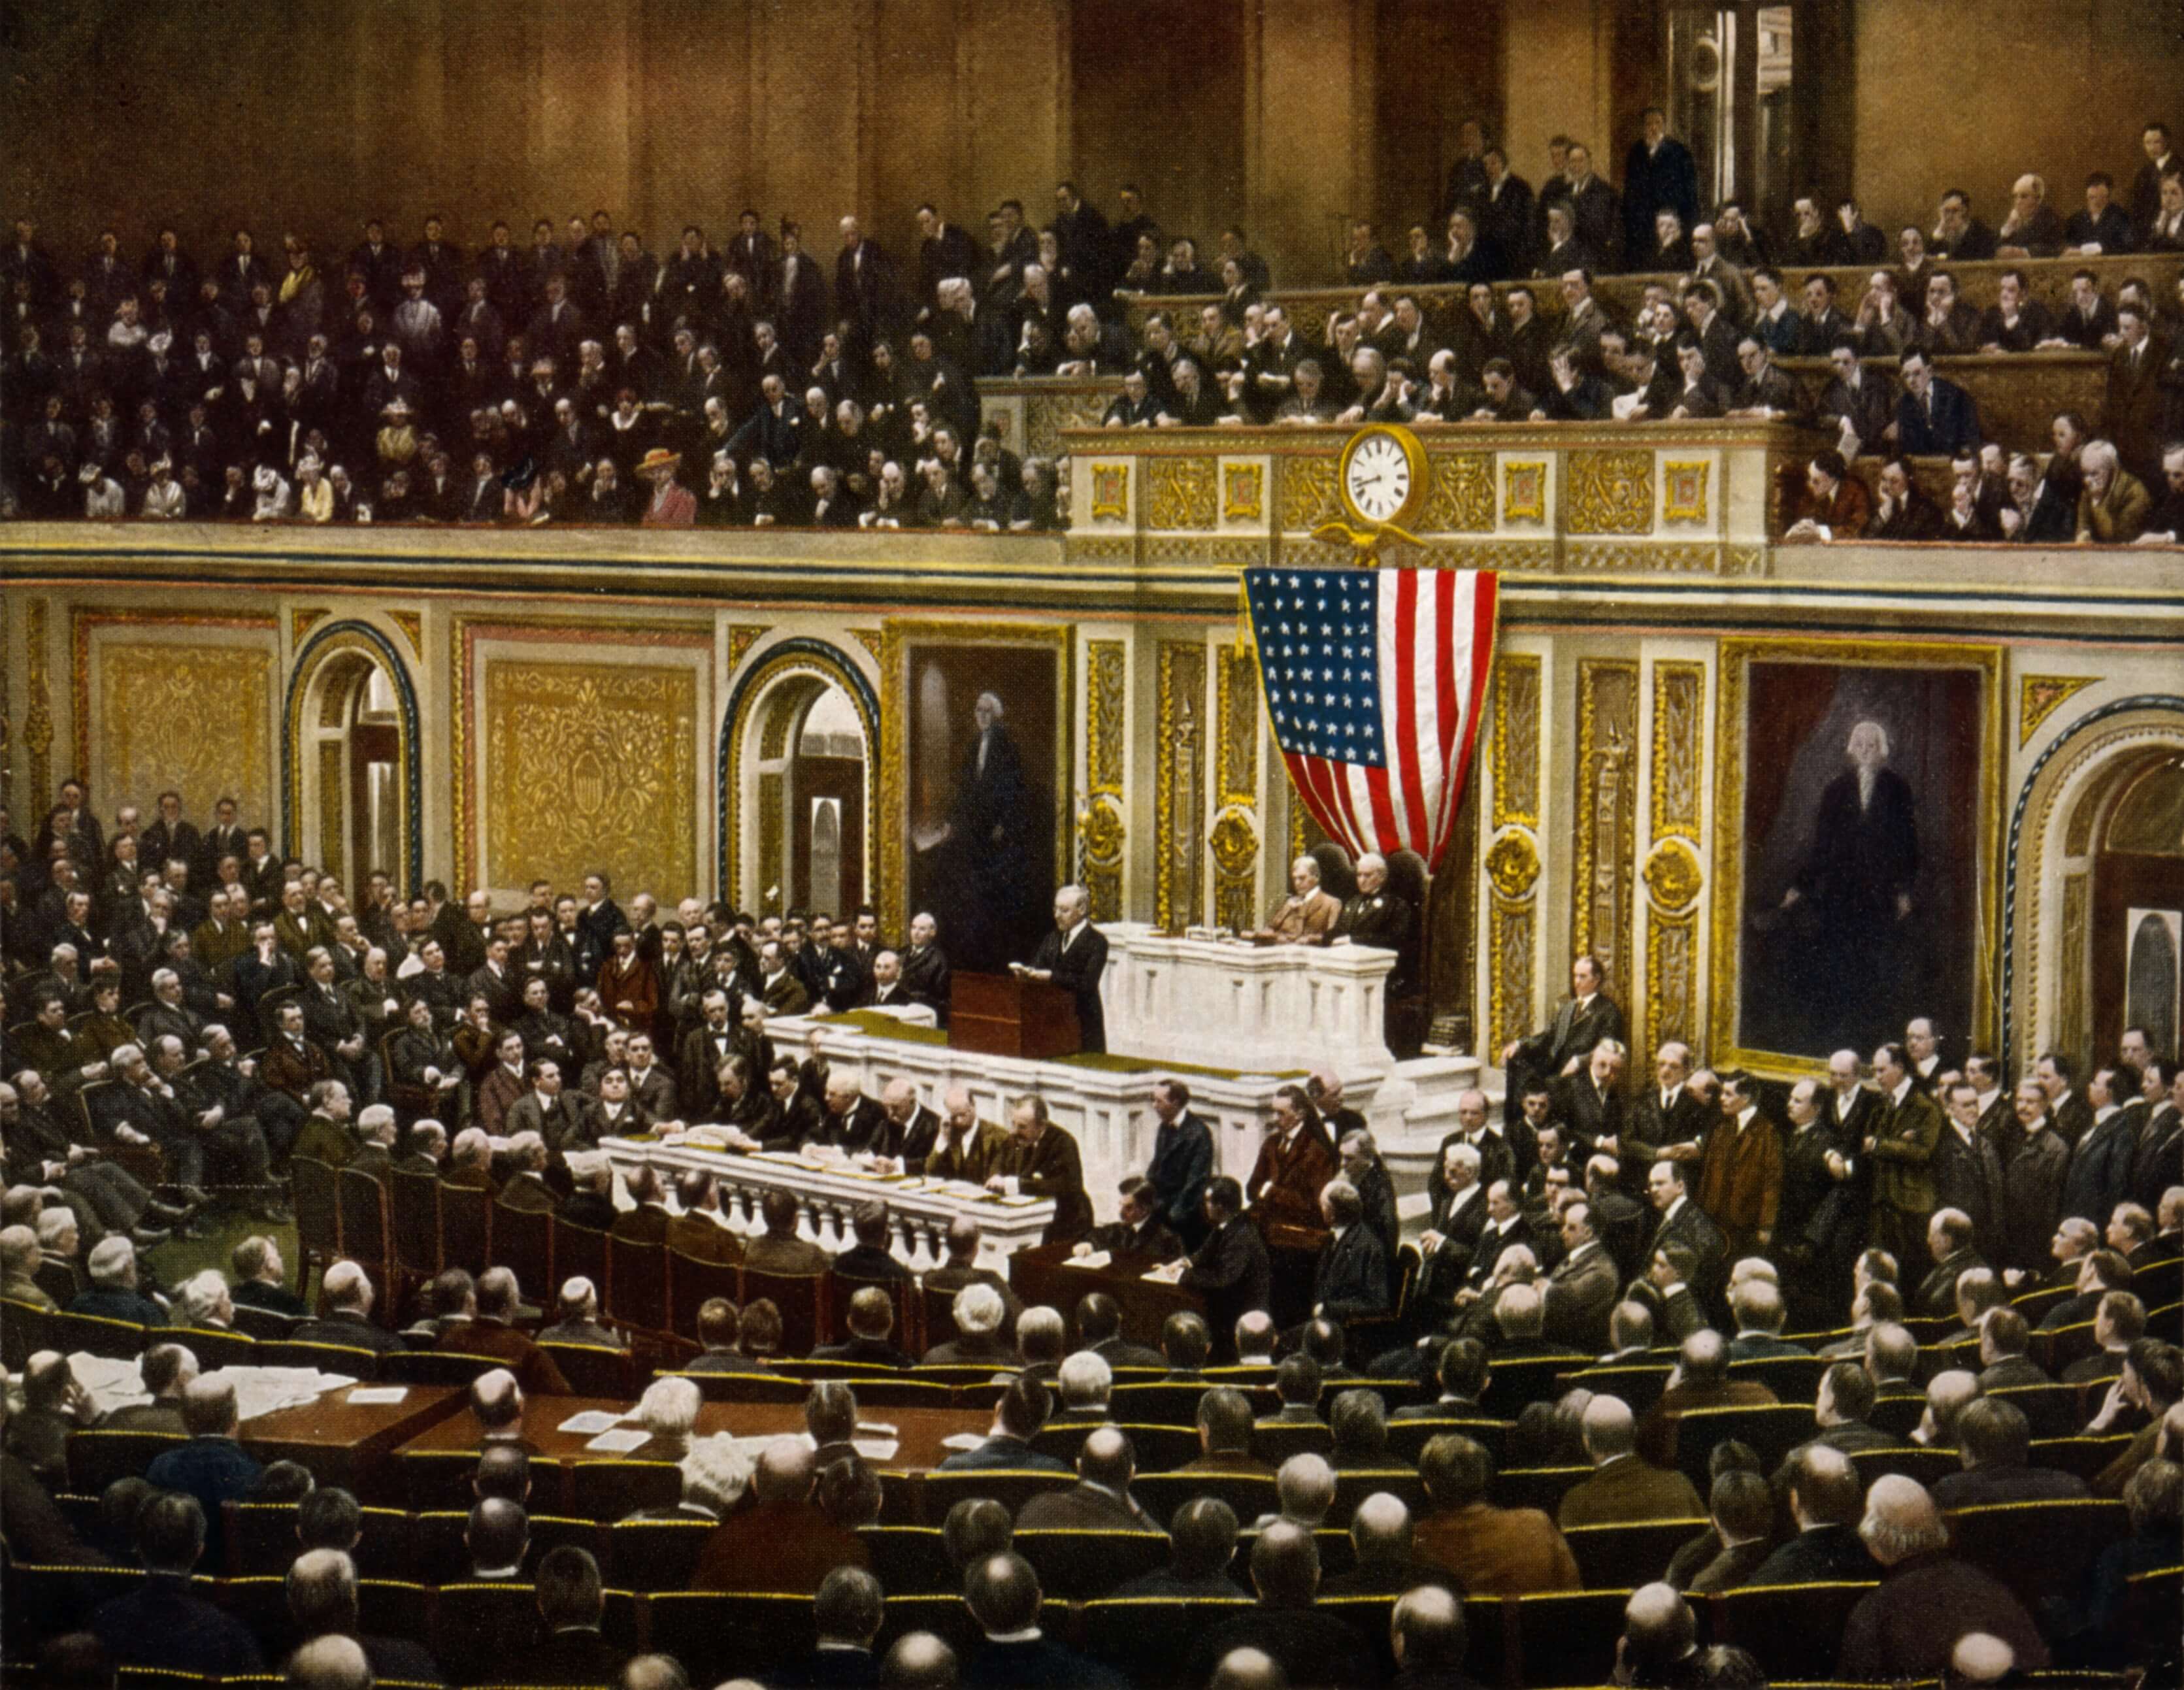 CELA S'ST PASSE. un  02 avril - Chroniques catelles - histoire - President_Woodrow_Wilson_asking_Congress_to_declare_war_on_Germany_2_April_1917